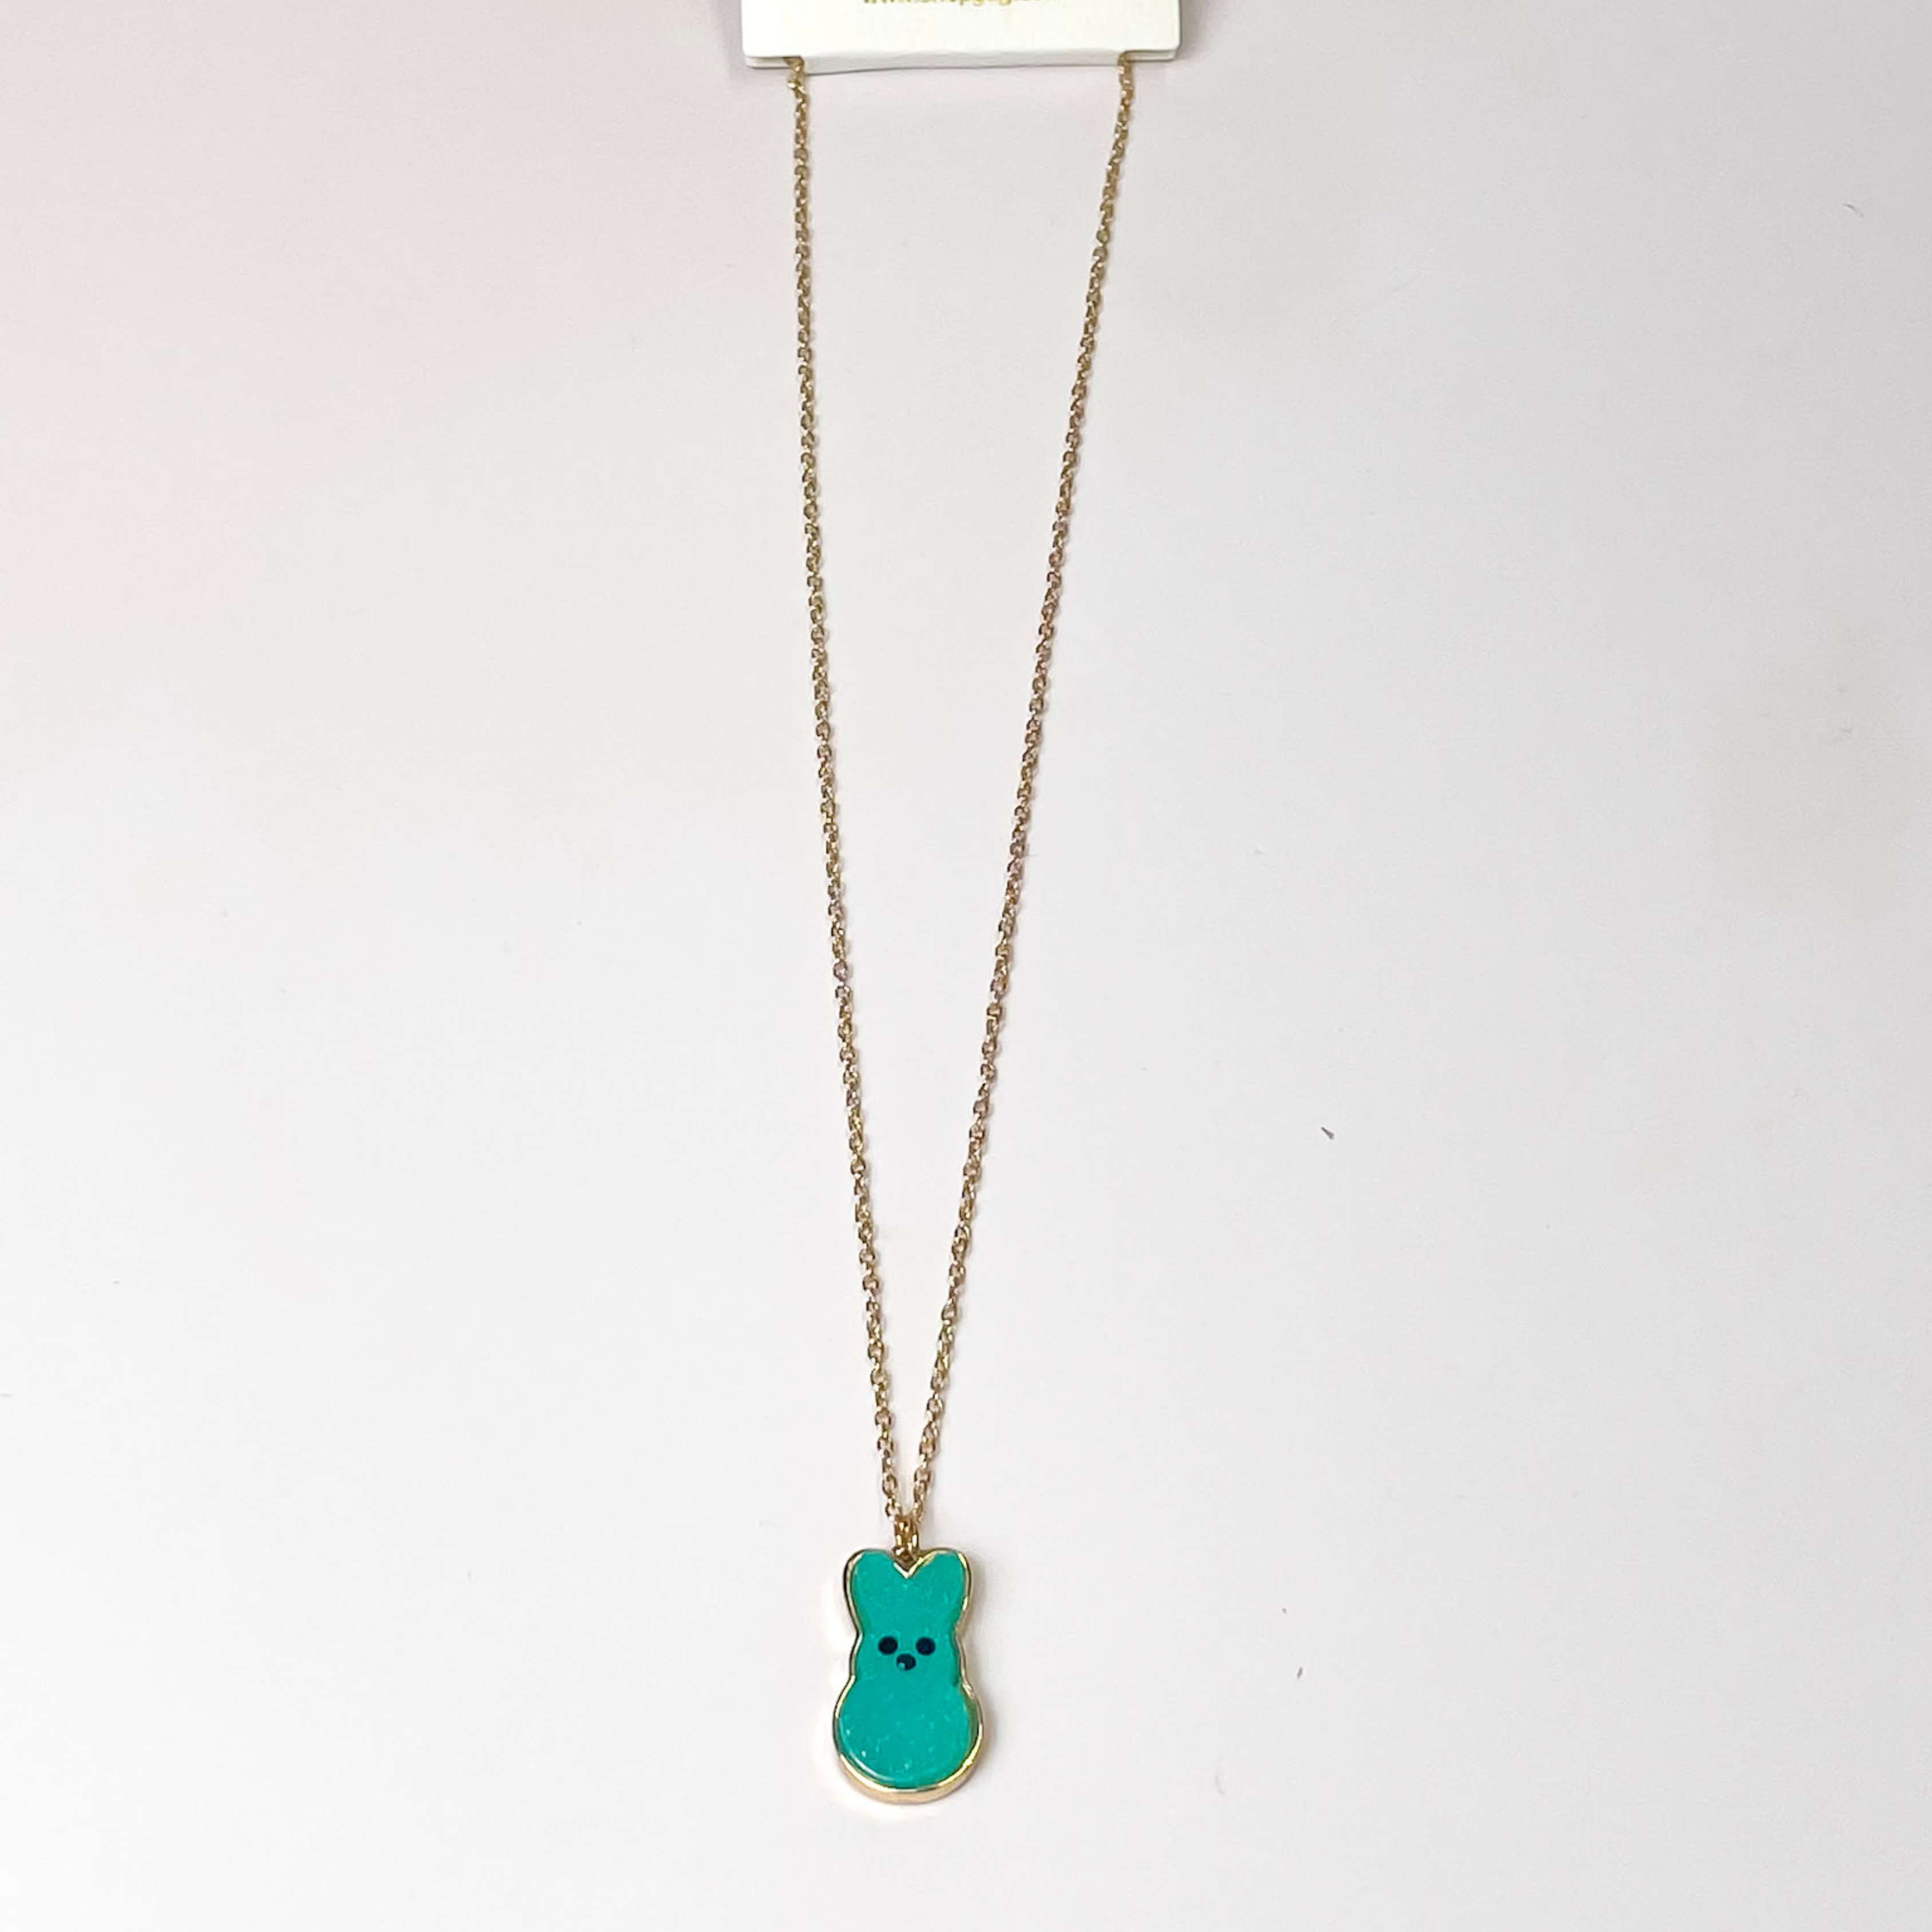 Gold Chain Necklace with Bunny Pendant in Green - Giddy Up Glamour Boutique